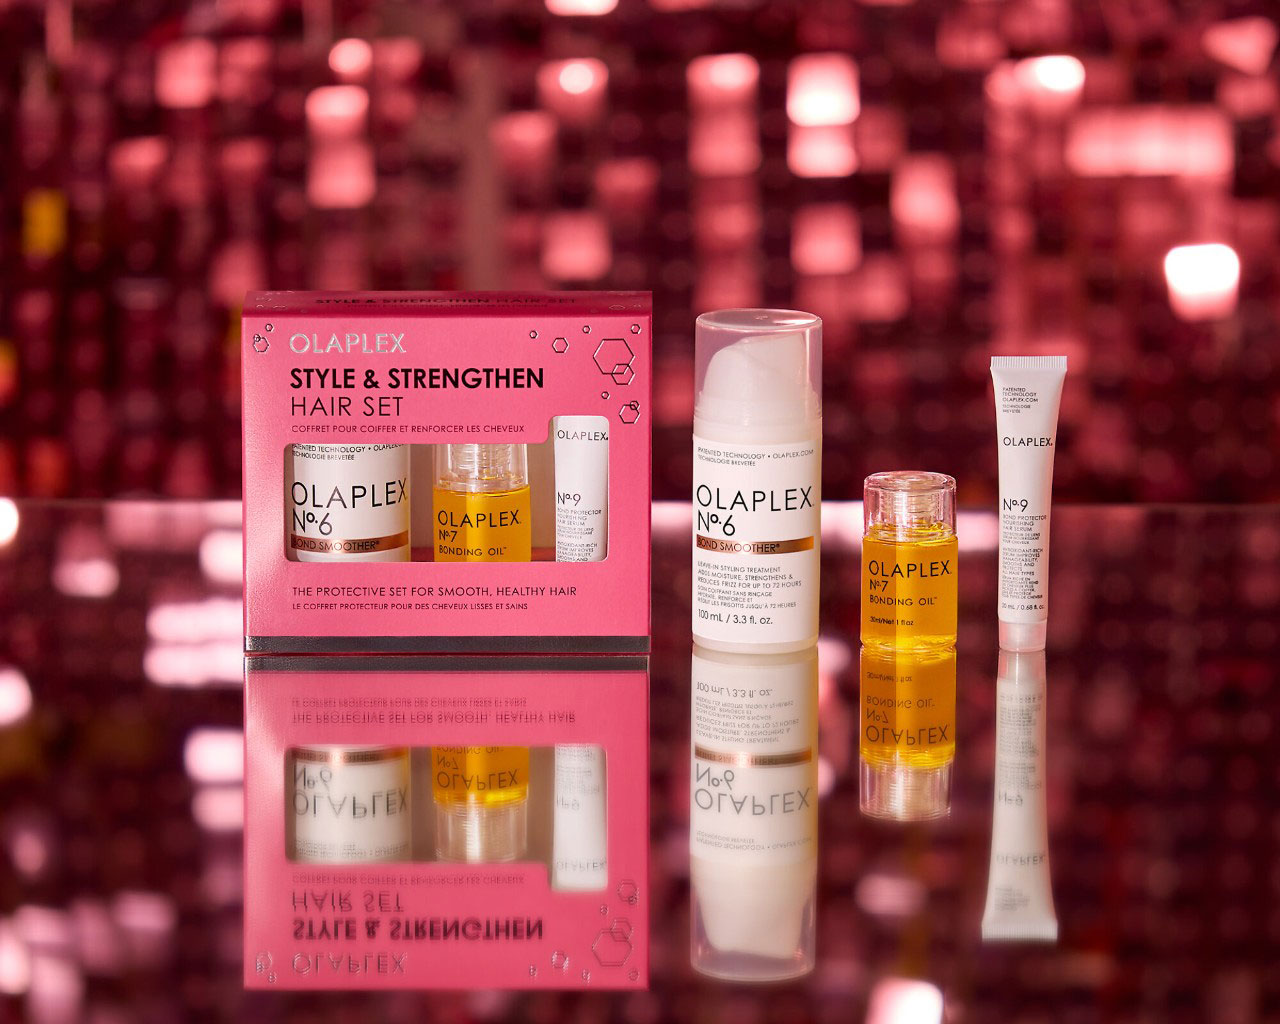 A pink box containing 3 Olaplex products with a glimmering red background.